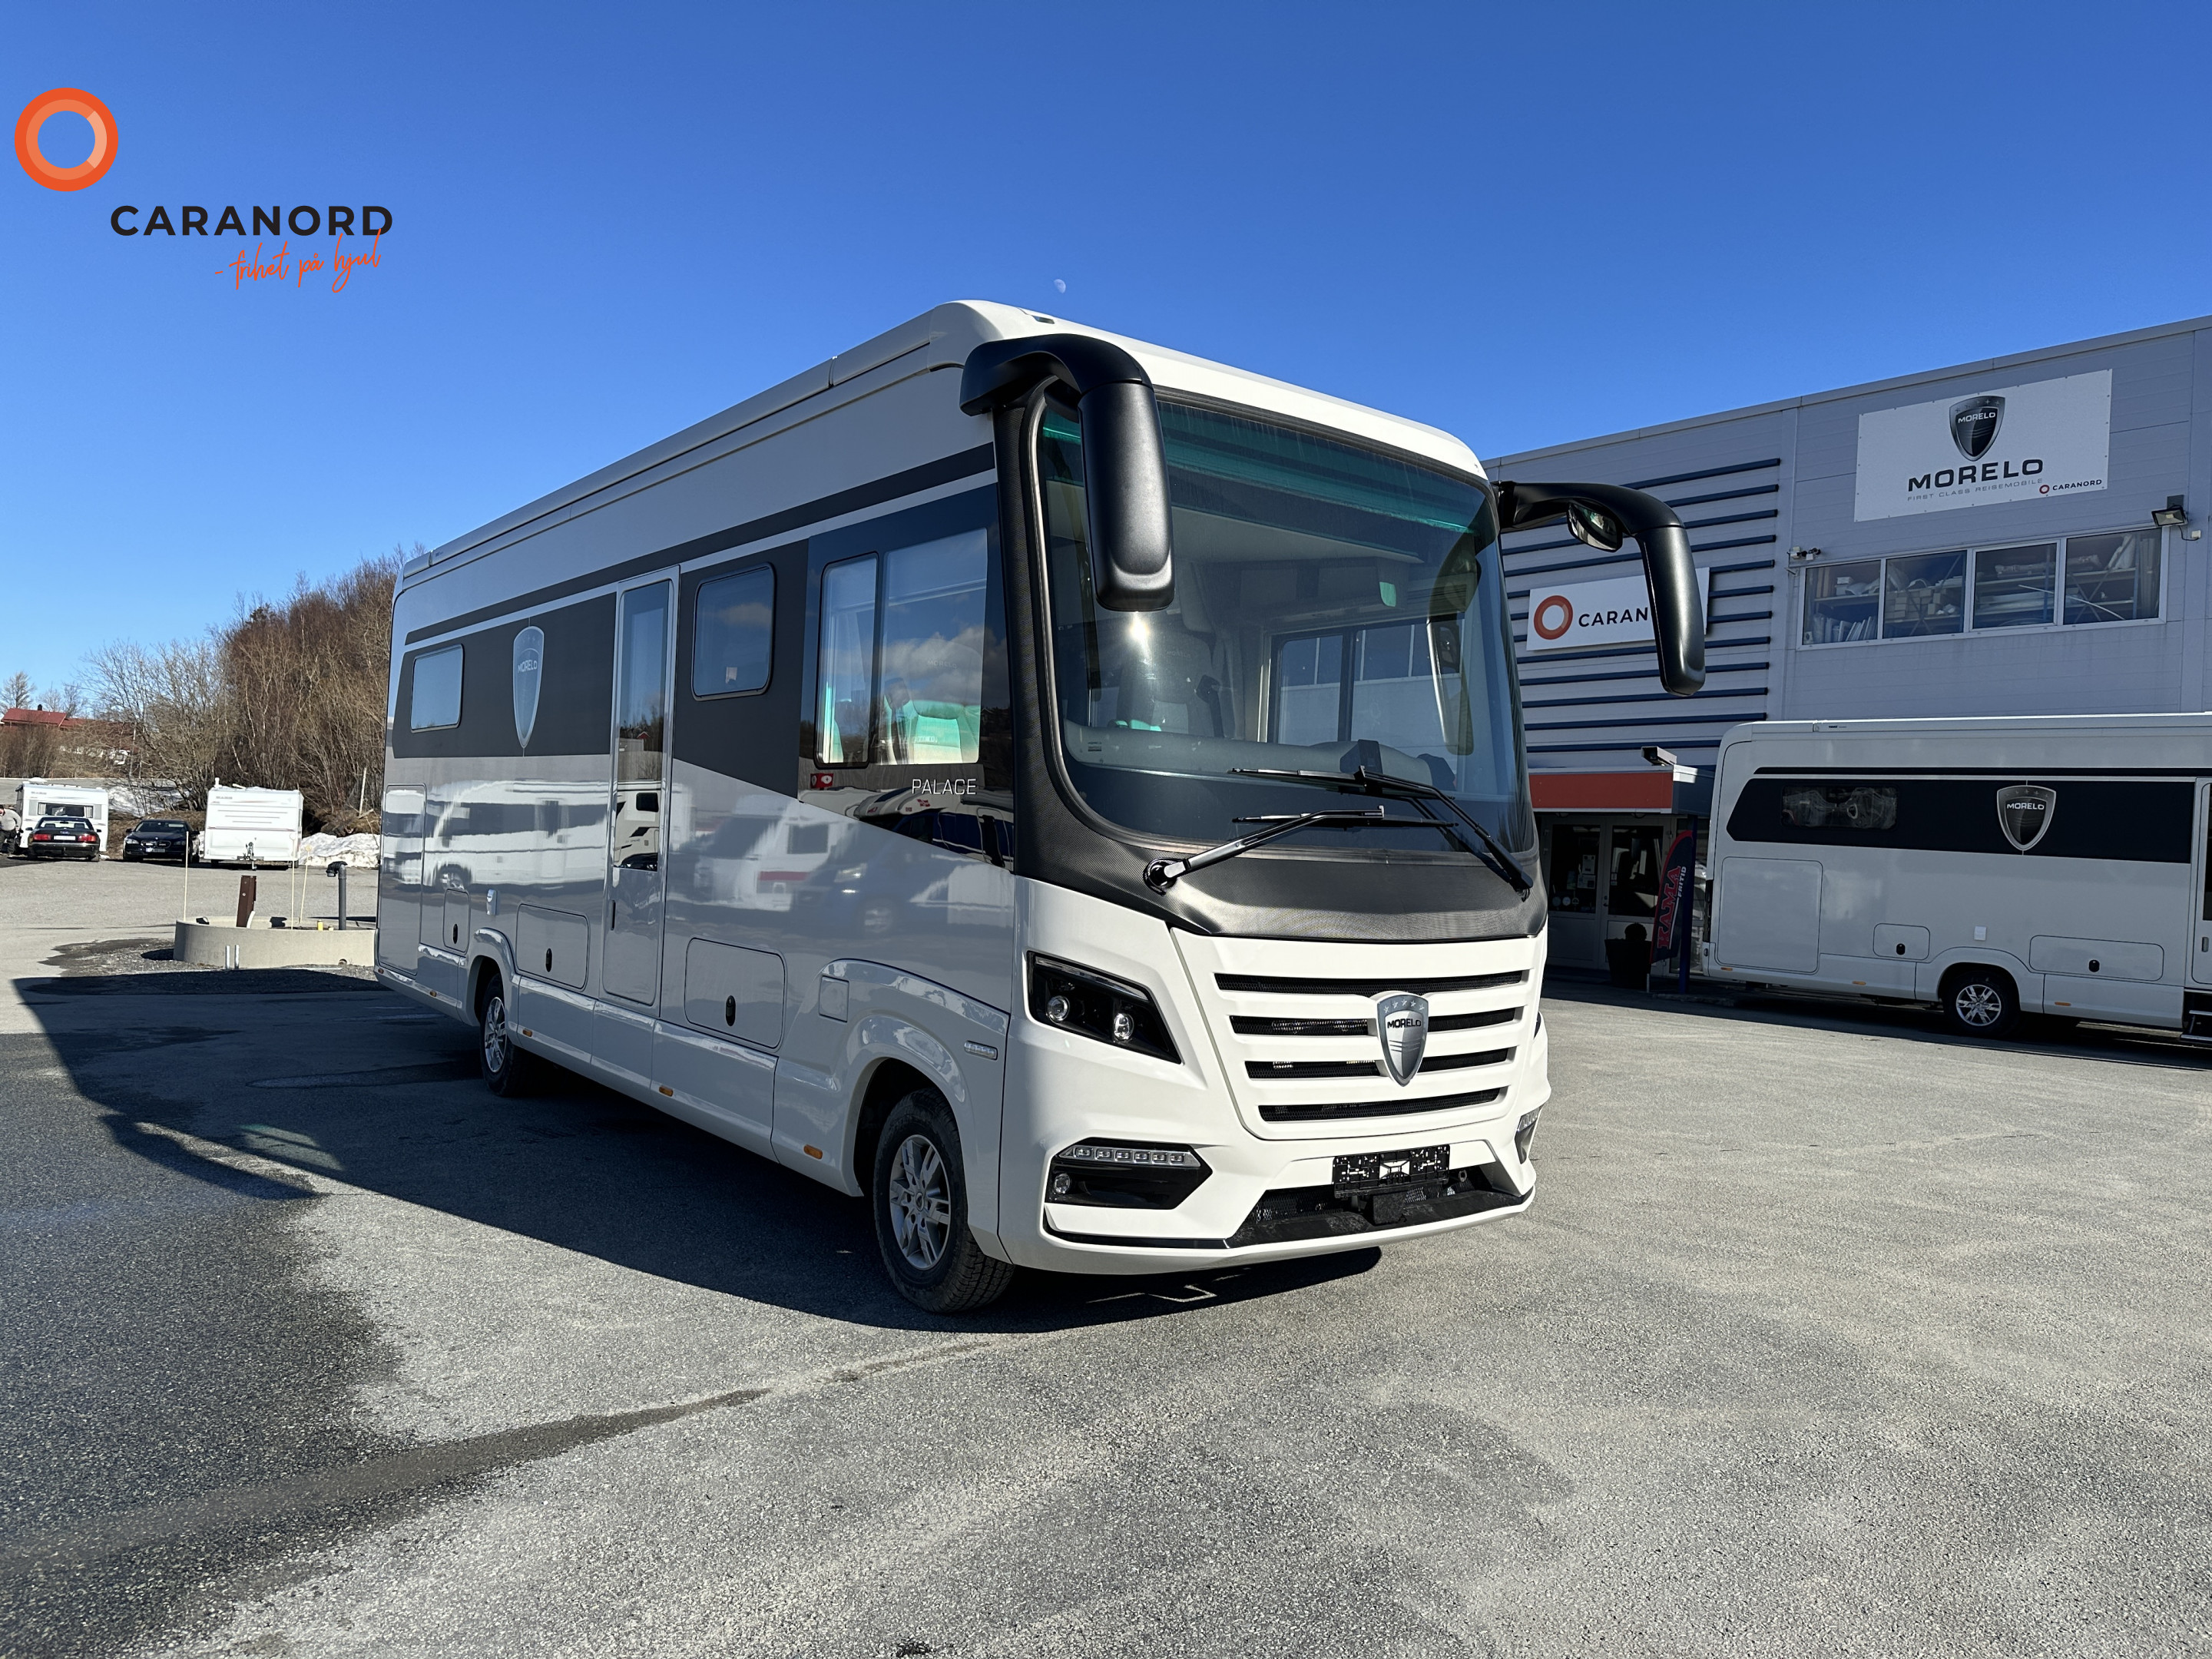 Palace 90 M - IVECO Daily 70 C 18 - 3.0 / 129 /175 (KW/HK) - Morelo